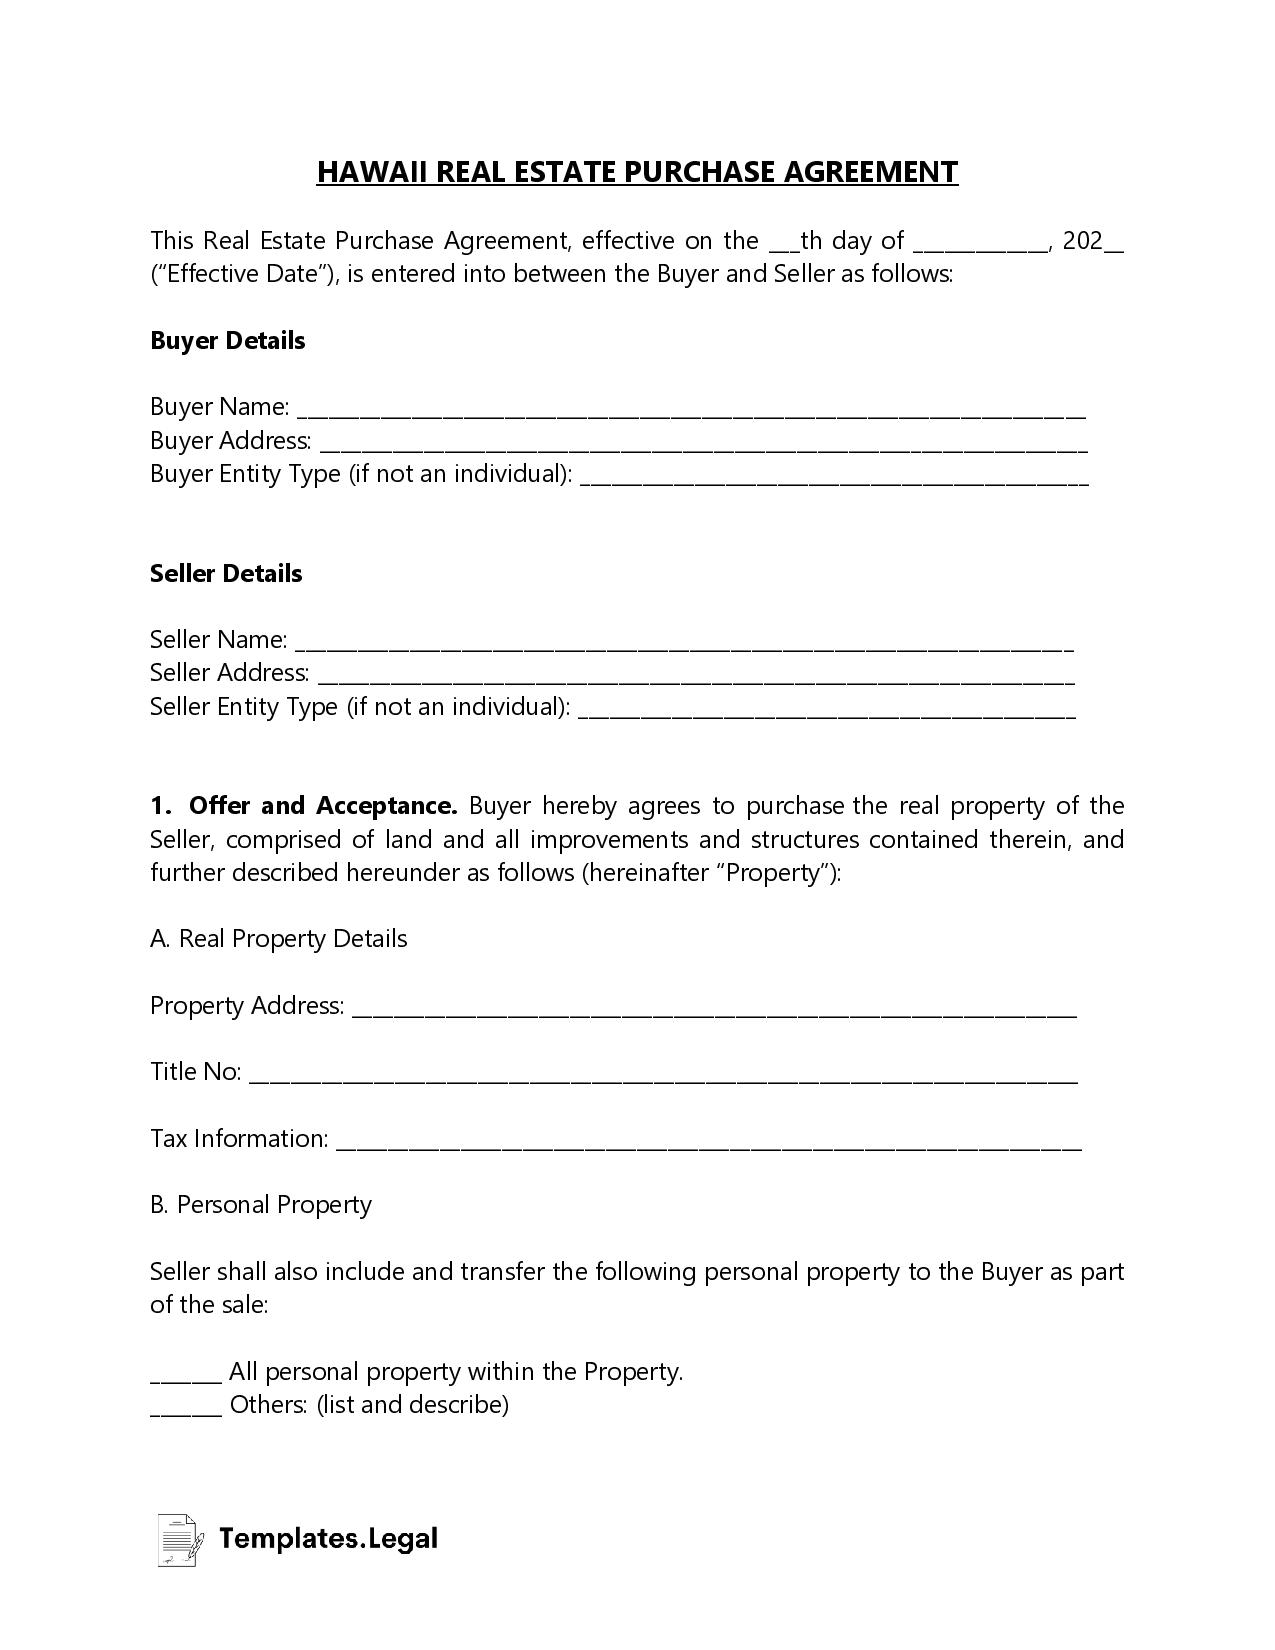 Hawaii Real Estate Purchase Agreement - Templates.Legal